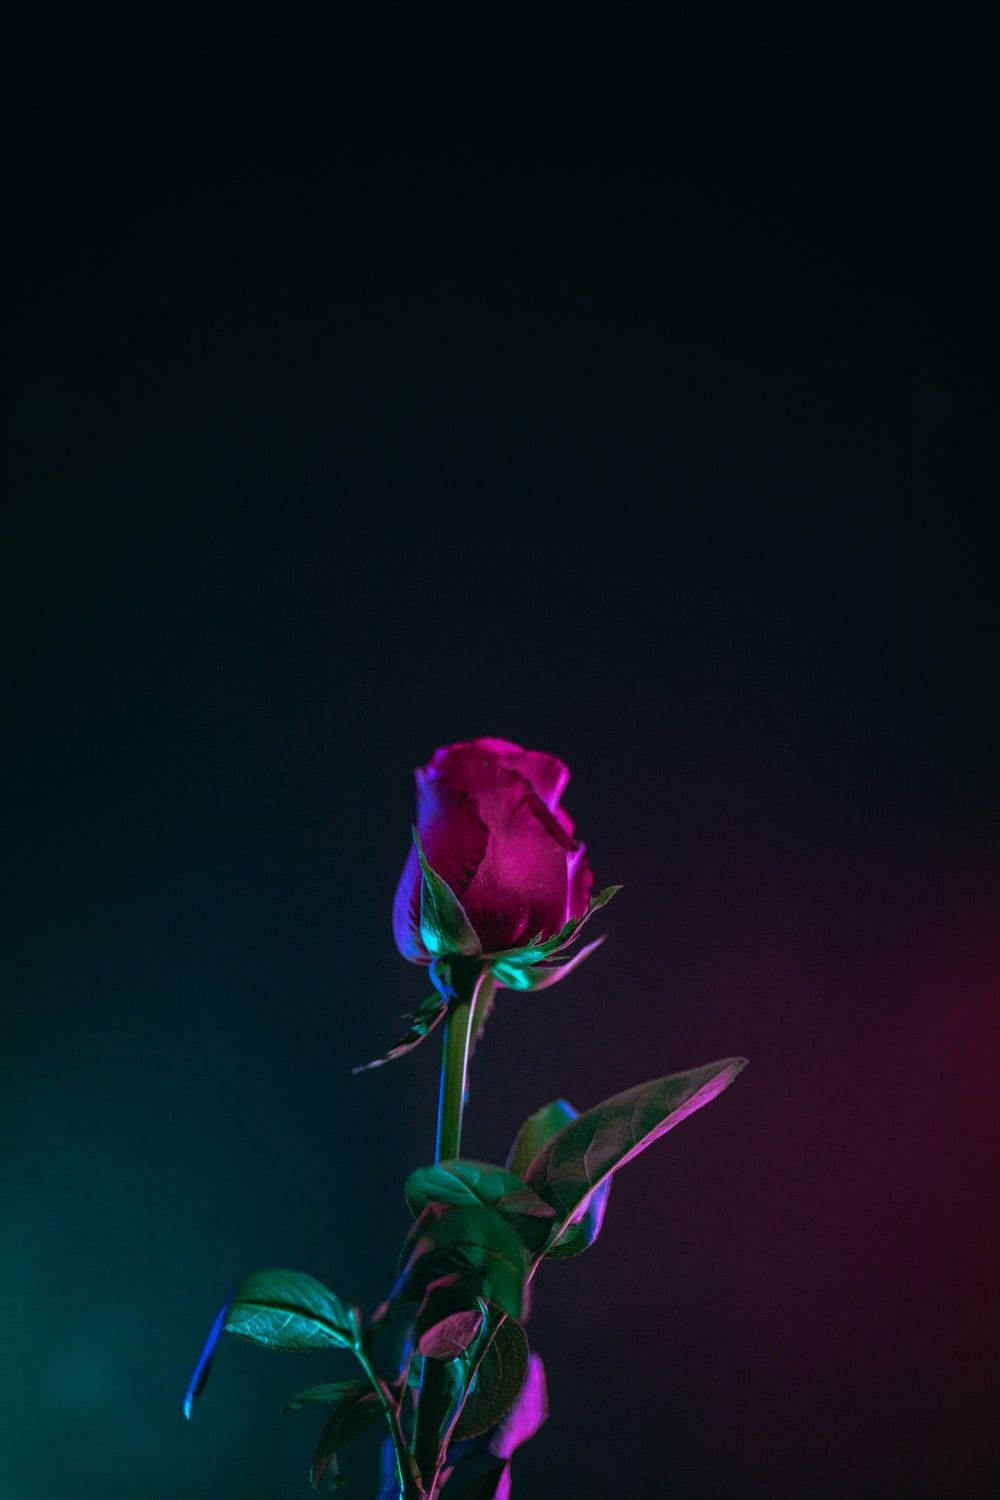 Red Rose Flower Oled Iphone Wallpaper